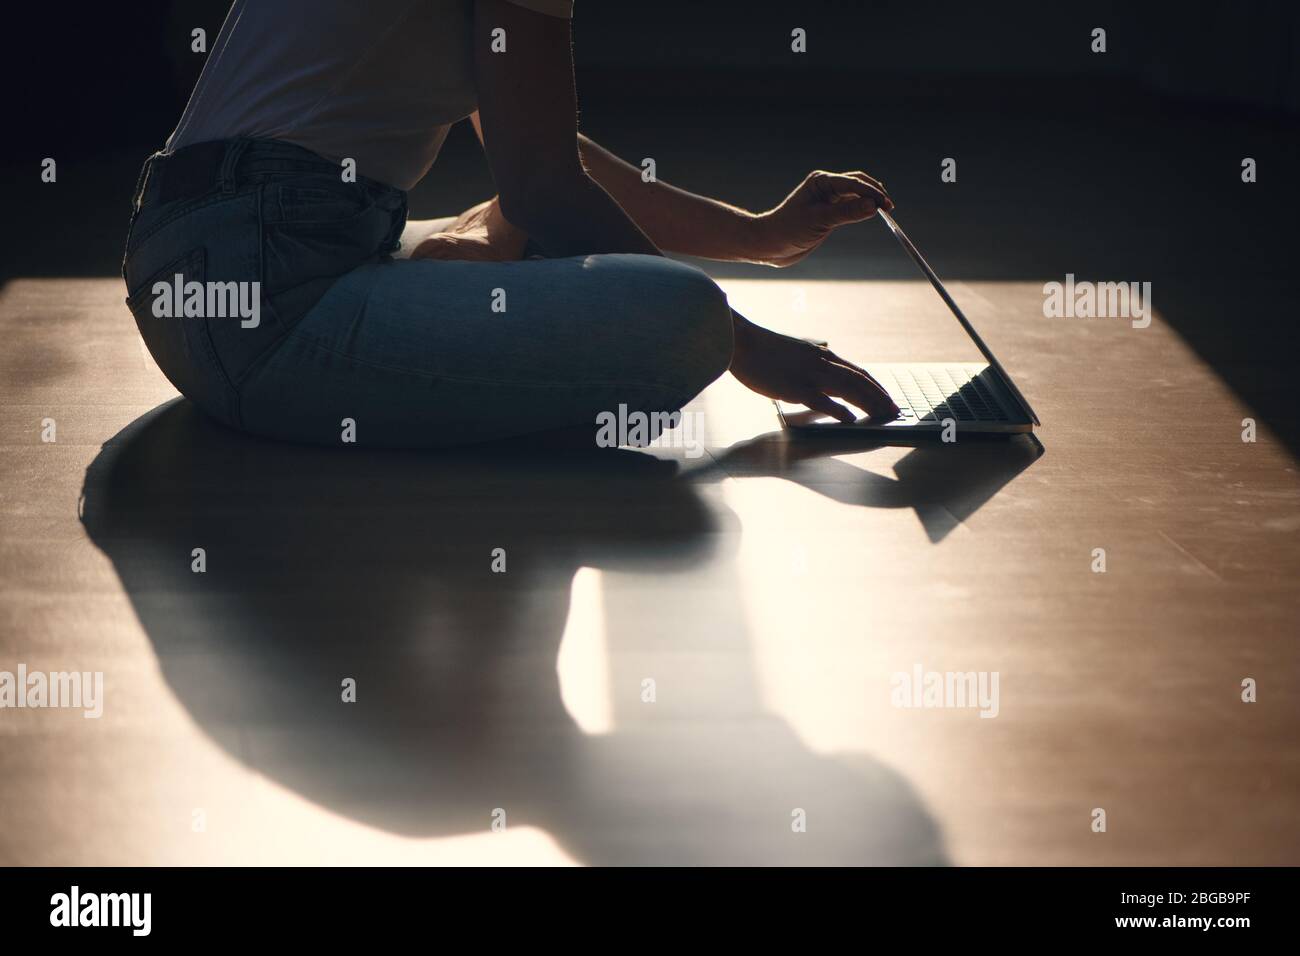 Cropped image of woman sitting on the floor and closing laptop. Stock Photo